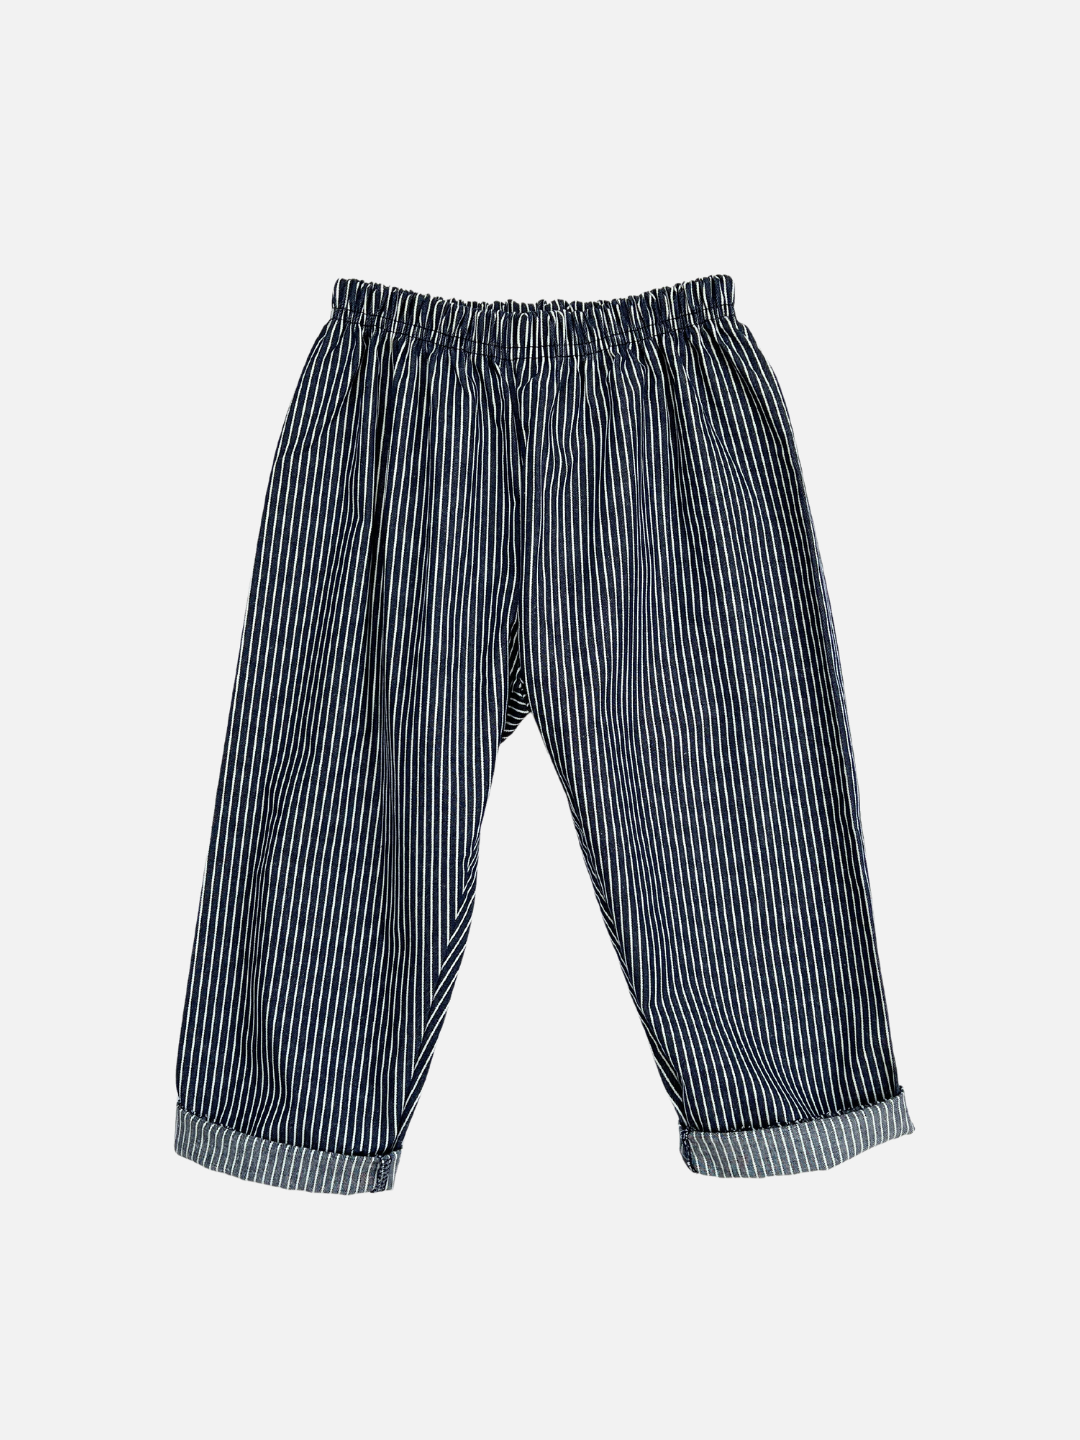 Navy | Front view of kids dark blue pants with narrow white vertical stripes, cuffed at the ankle.